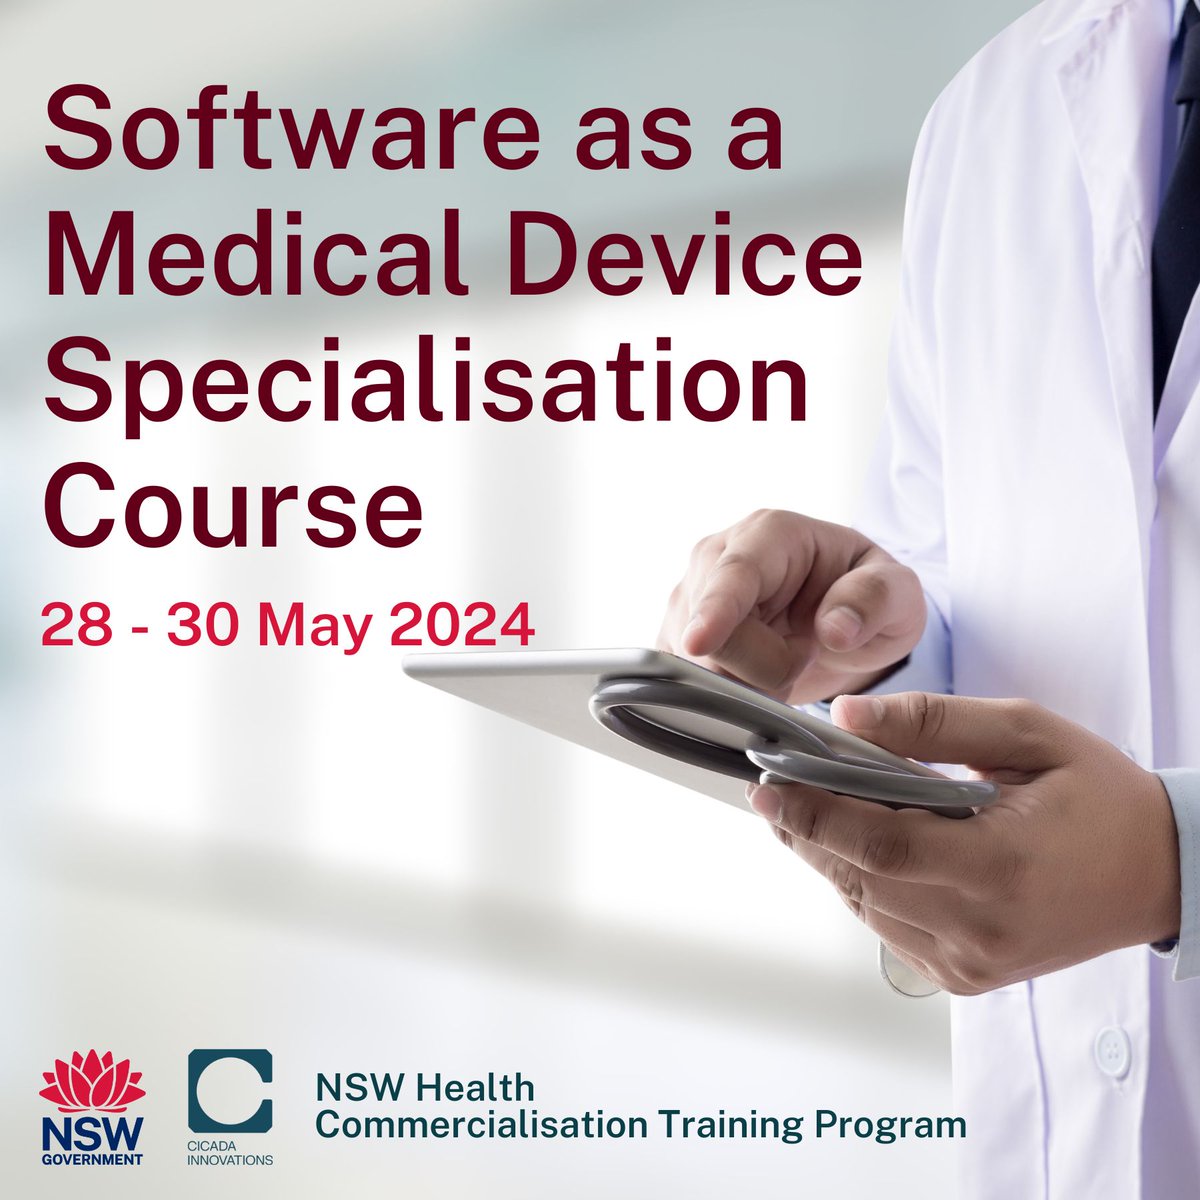 📣Attention #DigitalHealth innovator & disruptor — apply to our FREE Software as a Medical Device specialisation course, part of the @NSWHealth Commercialisation Training Program. Learn from experts @ANDHealthAU how to skyrocket your business.  hubs.li/Q01wk1Kp0